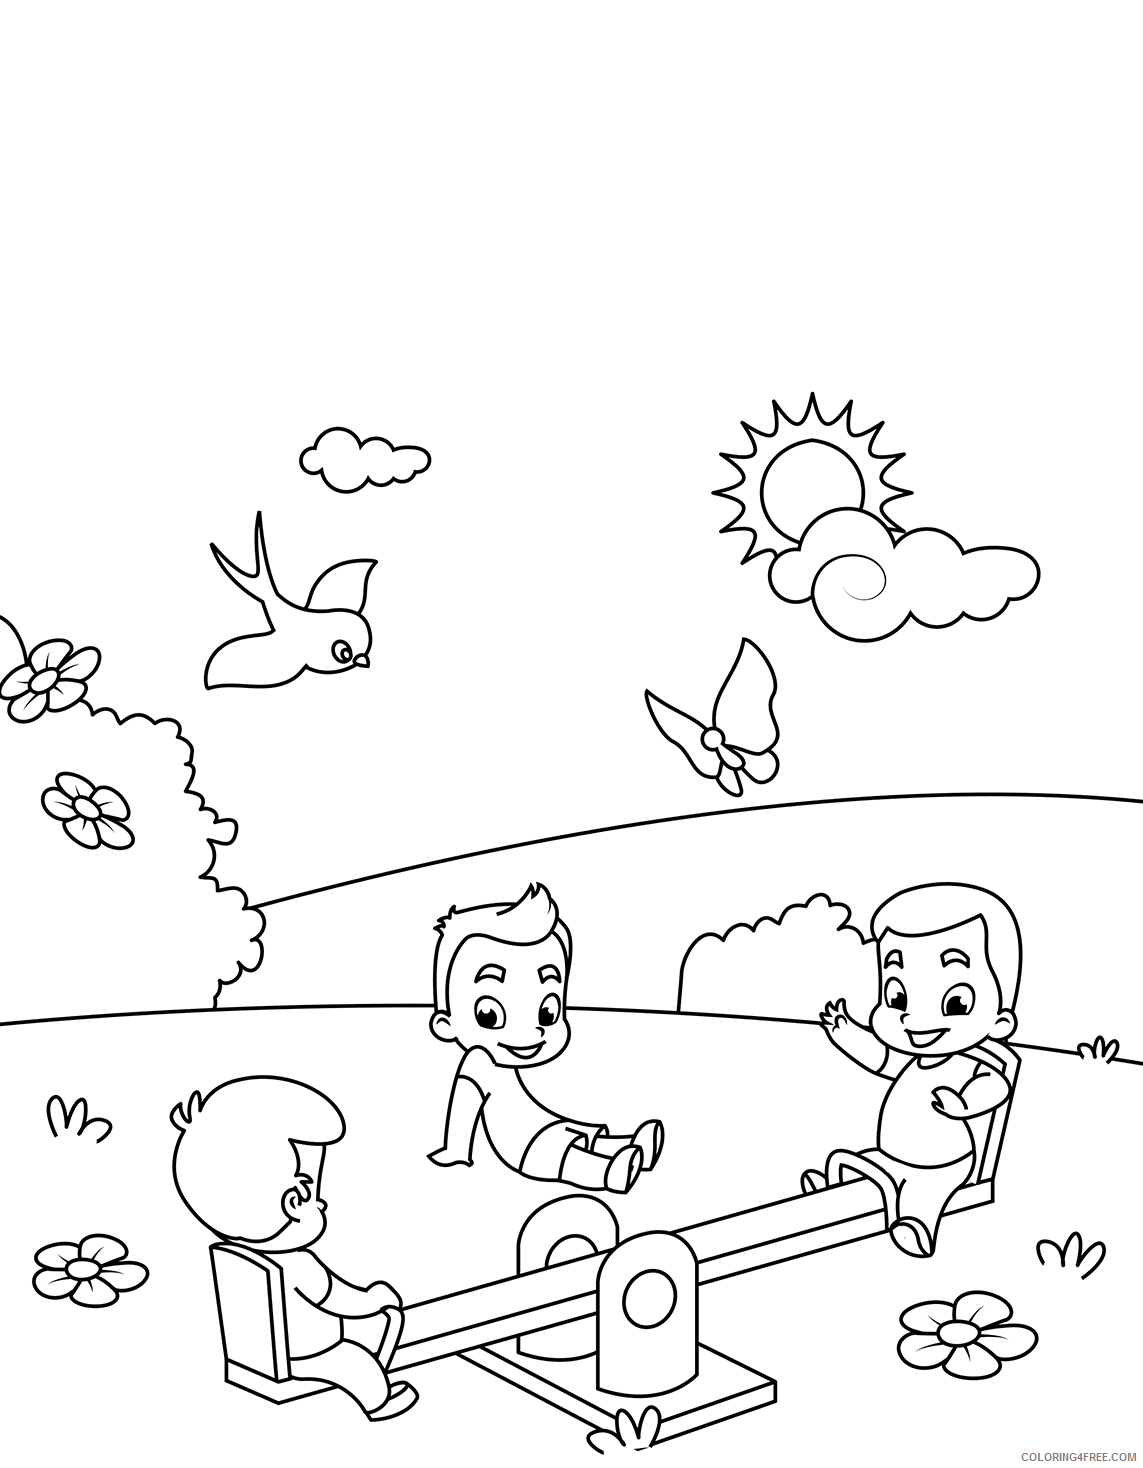 March Coloring Pages Playground in March Printable 2021 3970 Coloring4free